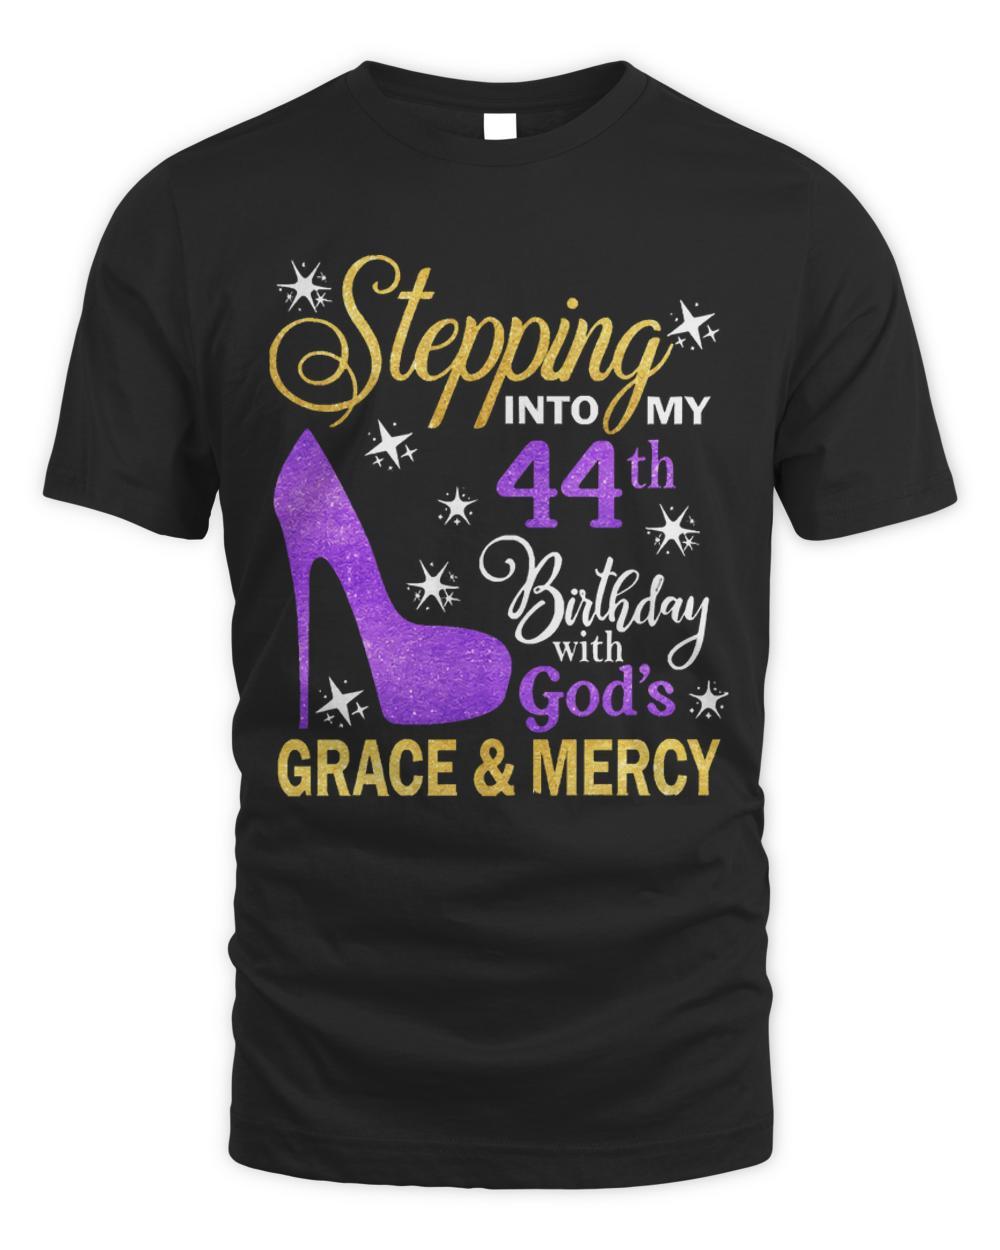 44th Birthday T-ShirtStepping Into My 44th Birthday With God's Grace & Mercy Bday T-Shirt (2)